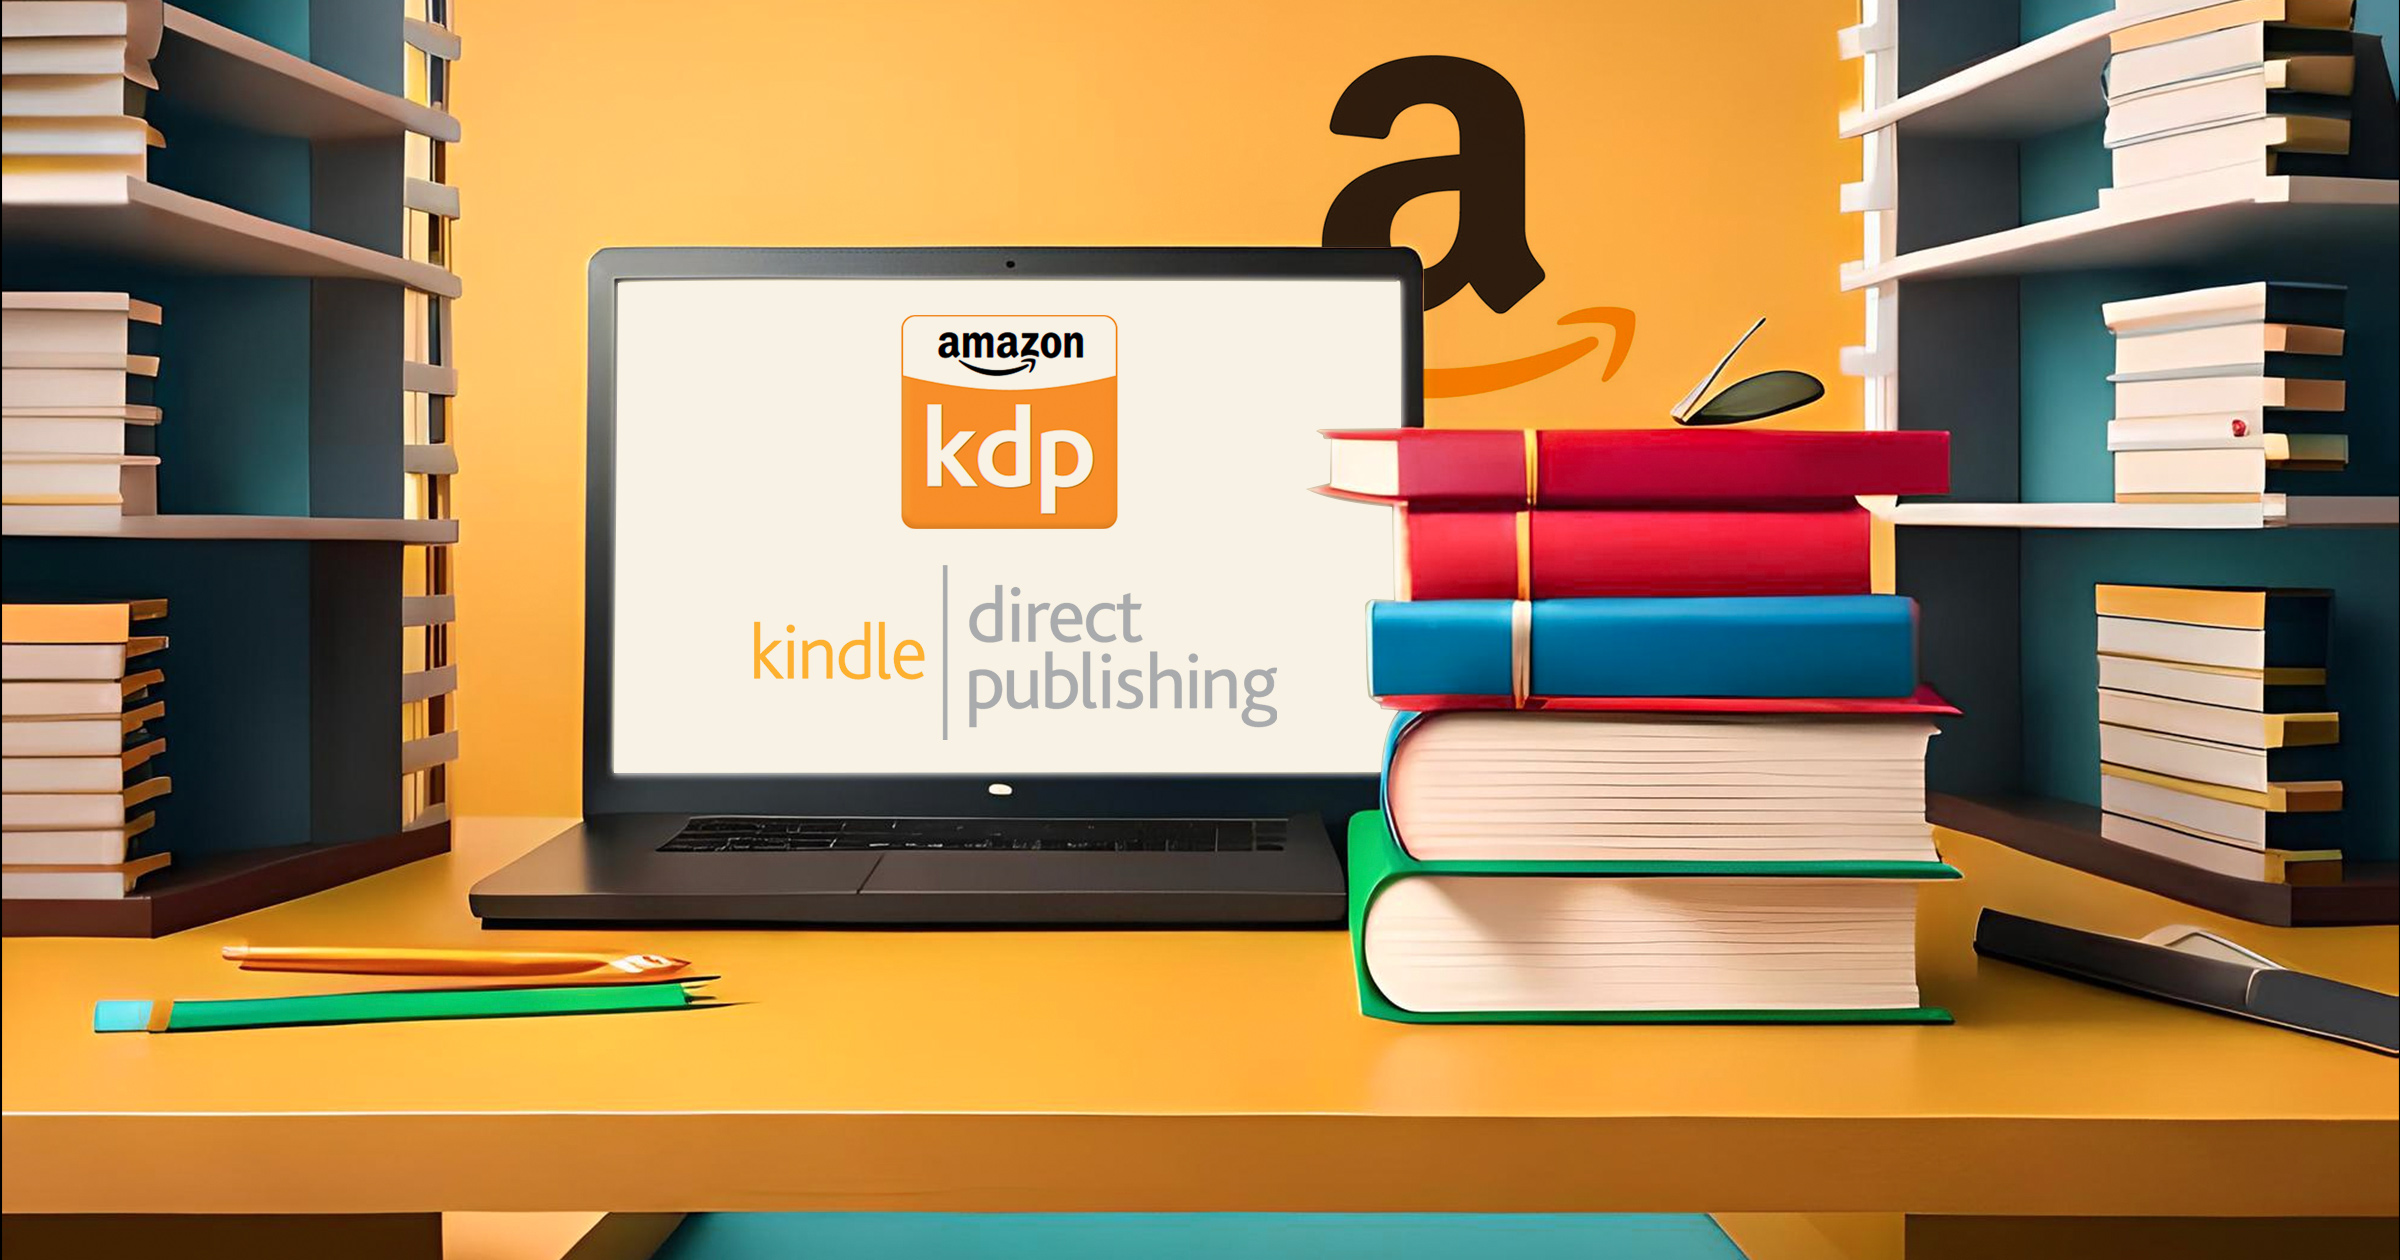 Amazon KDP: 8-Step Guide to Kindle Direct Publishing